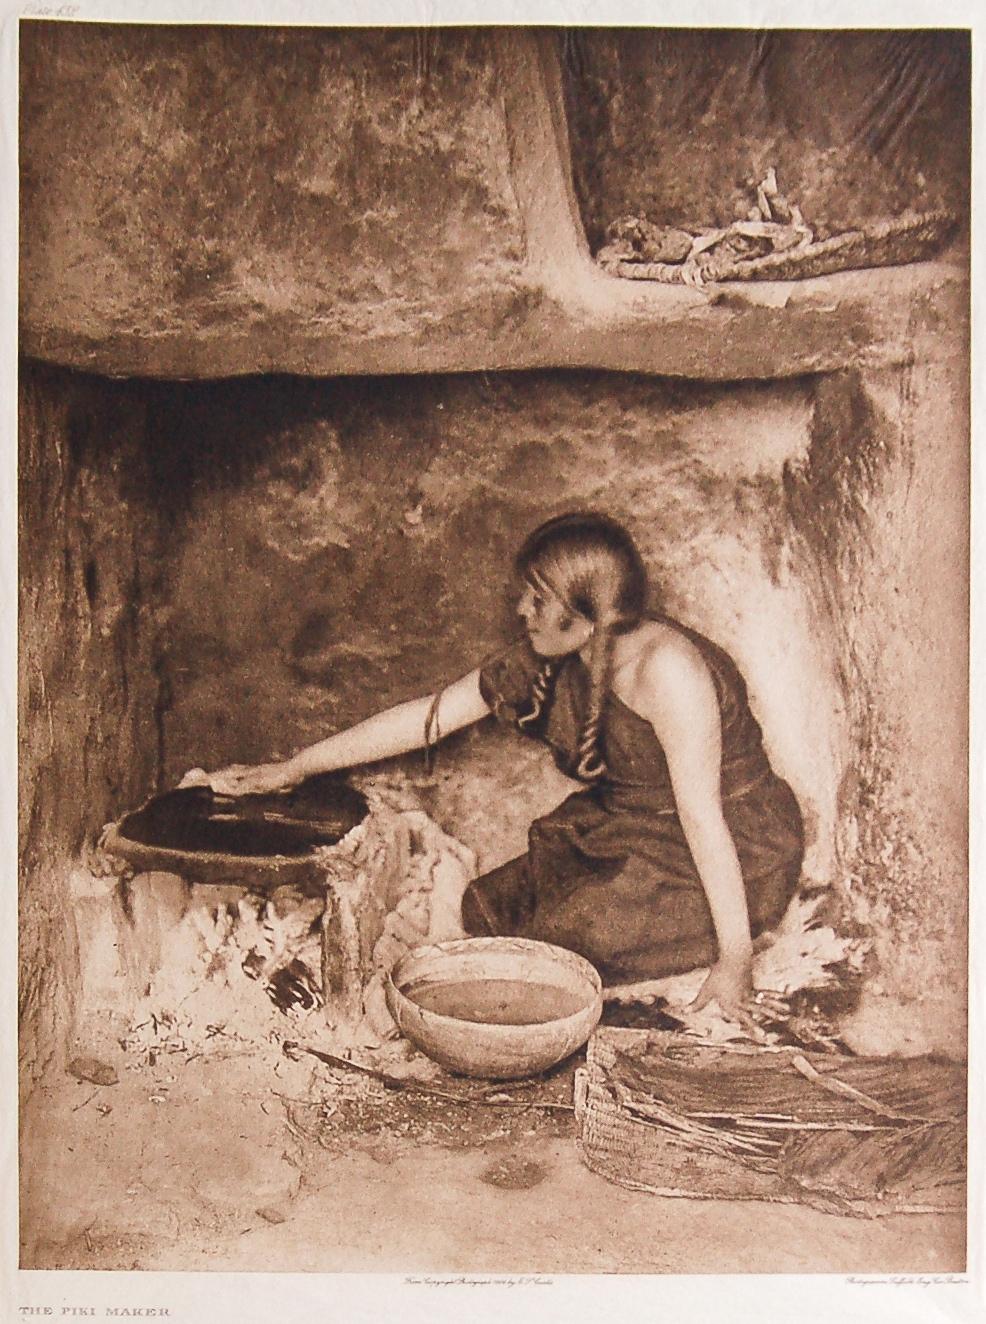 The Piki Maker, 1906 - Photograph by Edward S. Curtis